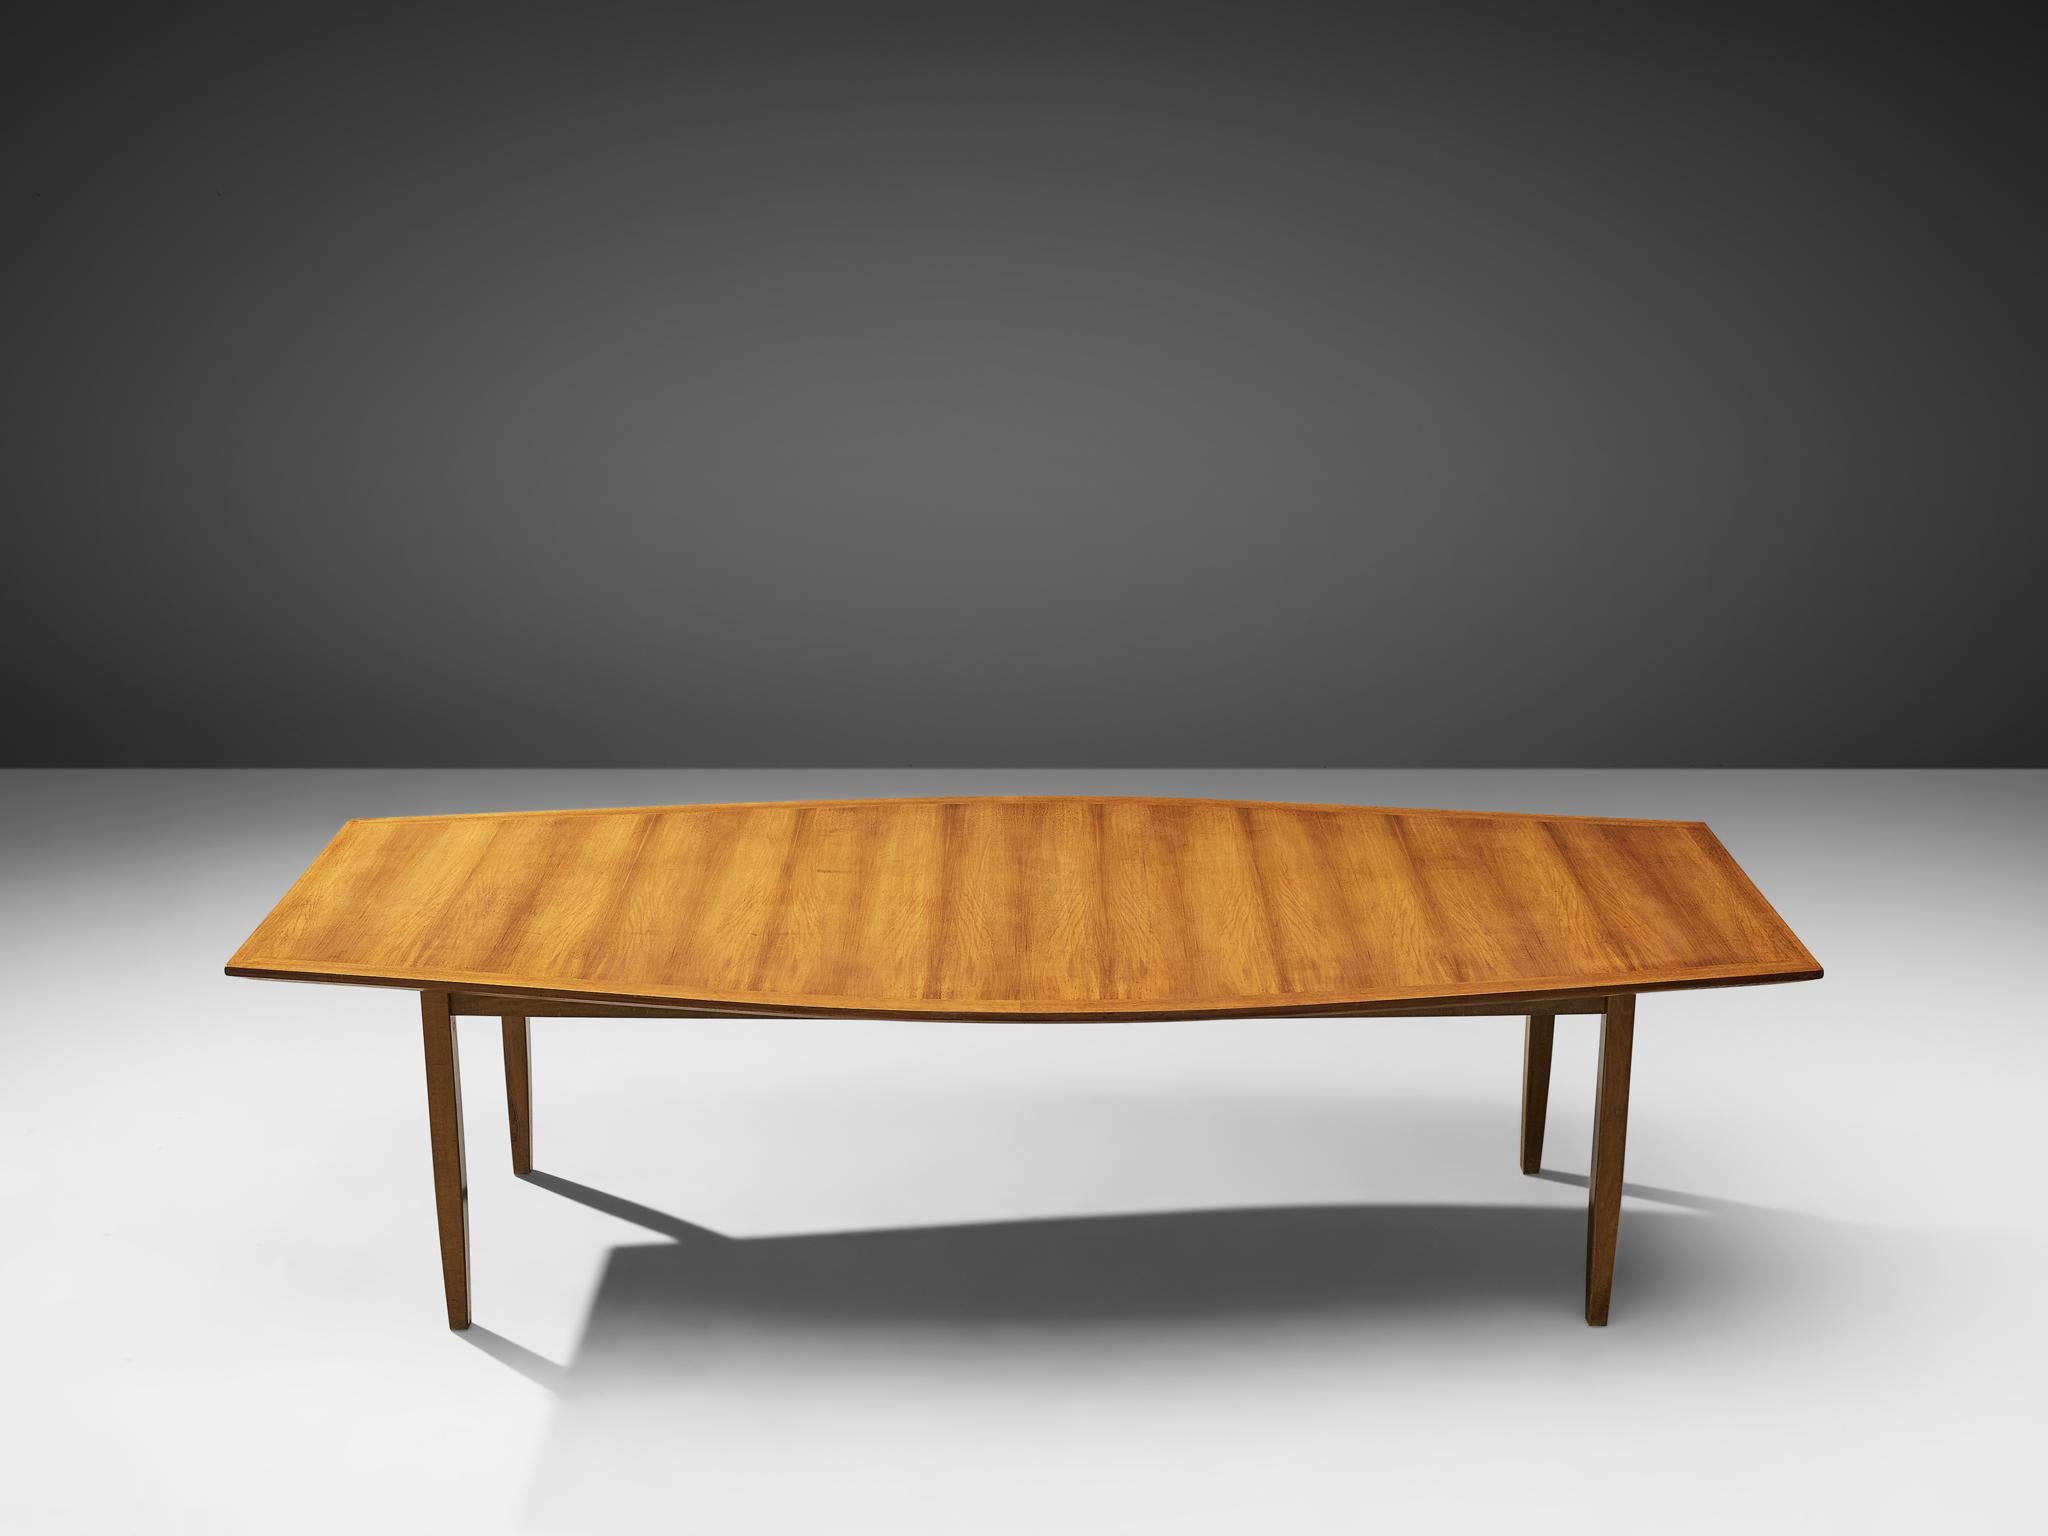 Florence Knoll for Florence Knoll International, large dining table, model 580 H, walnut, United States, 1963. Measures: 8.8 ft.

Large dining or conference table with boat shaped top in walnut. The table has four tapered wooden legs. The top of